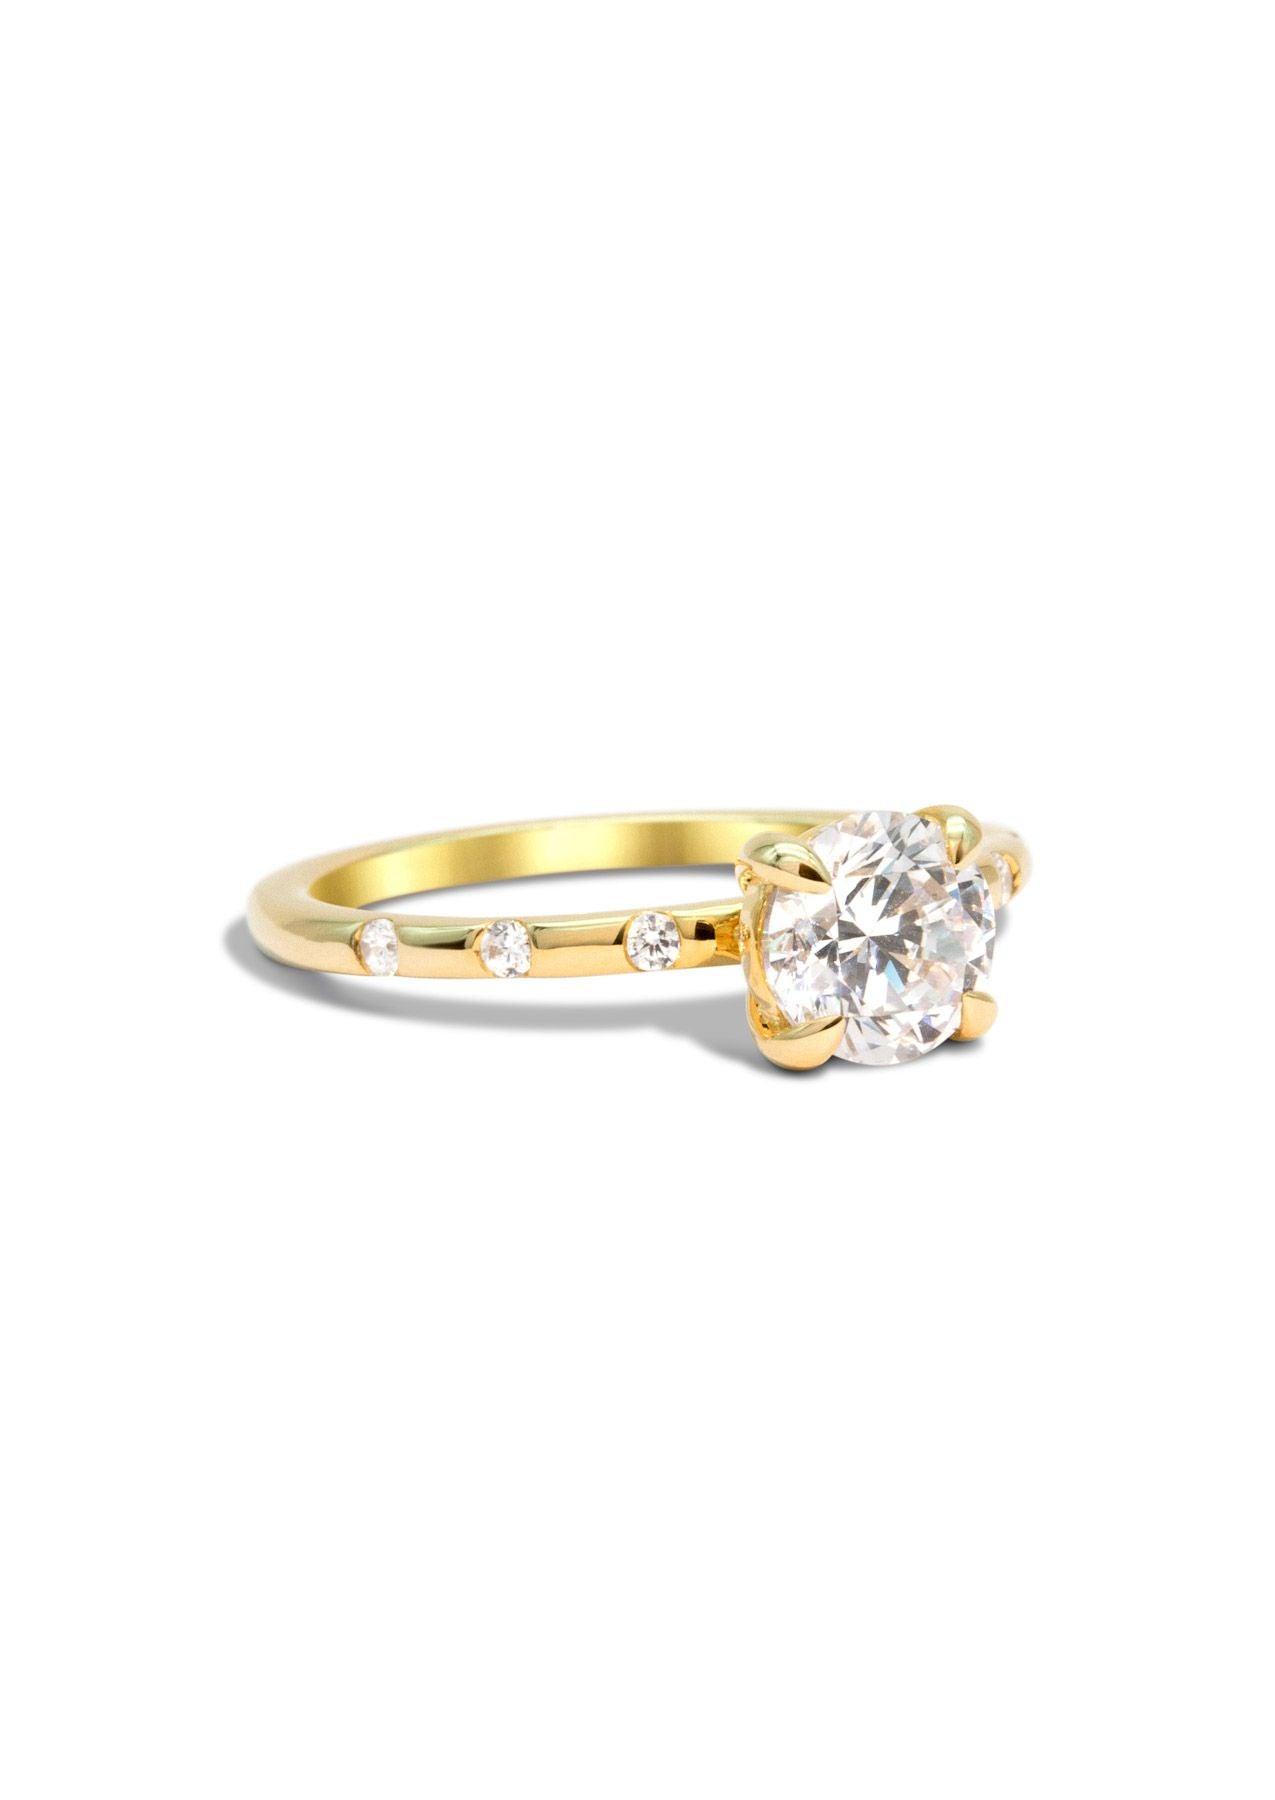 The Constance Yellow Gold Cultured Diamond Ring - Molten Store